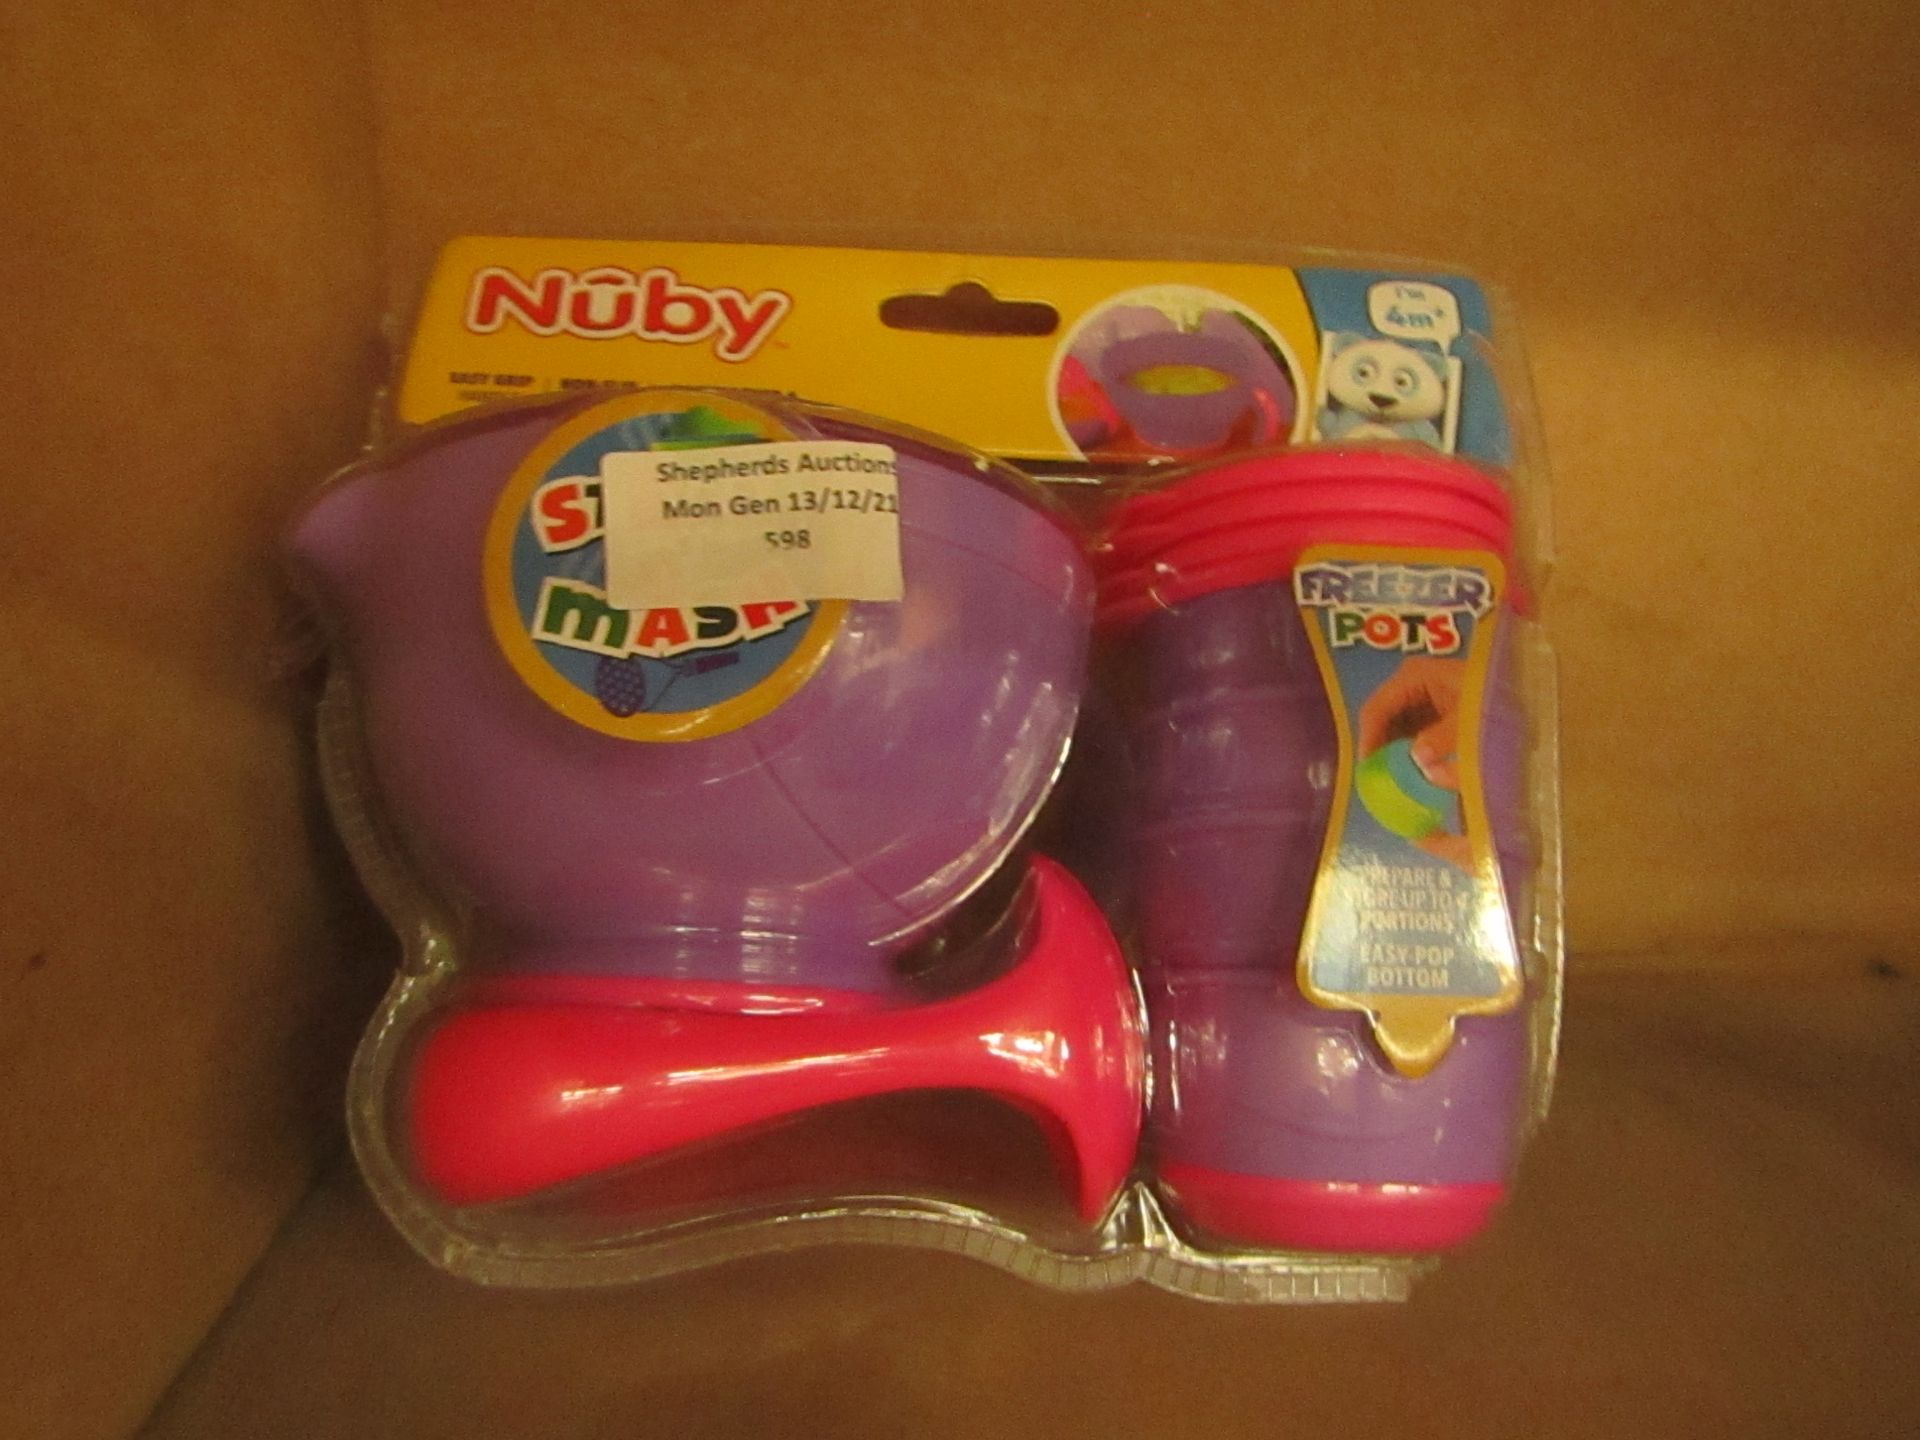 Nuby - Steam & Mash & 4x Freezer Pots - Item is For Purees & First Tastes - Unused & Packaged.